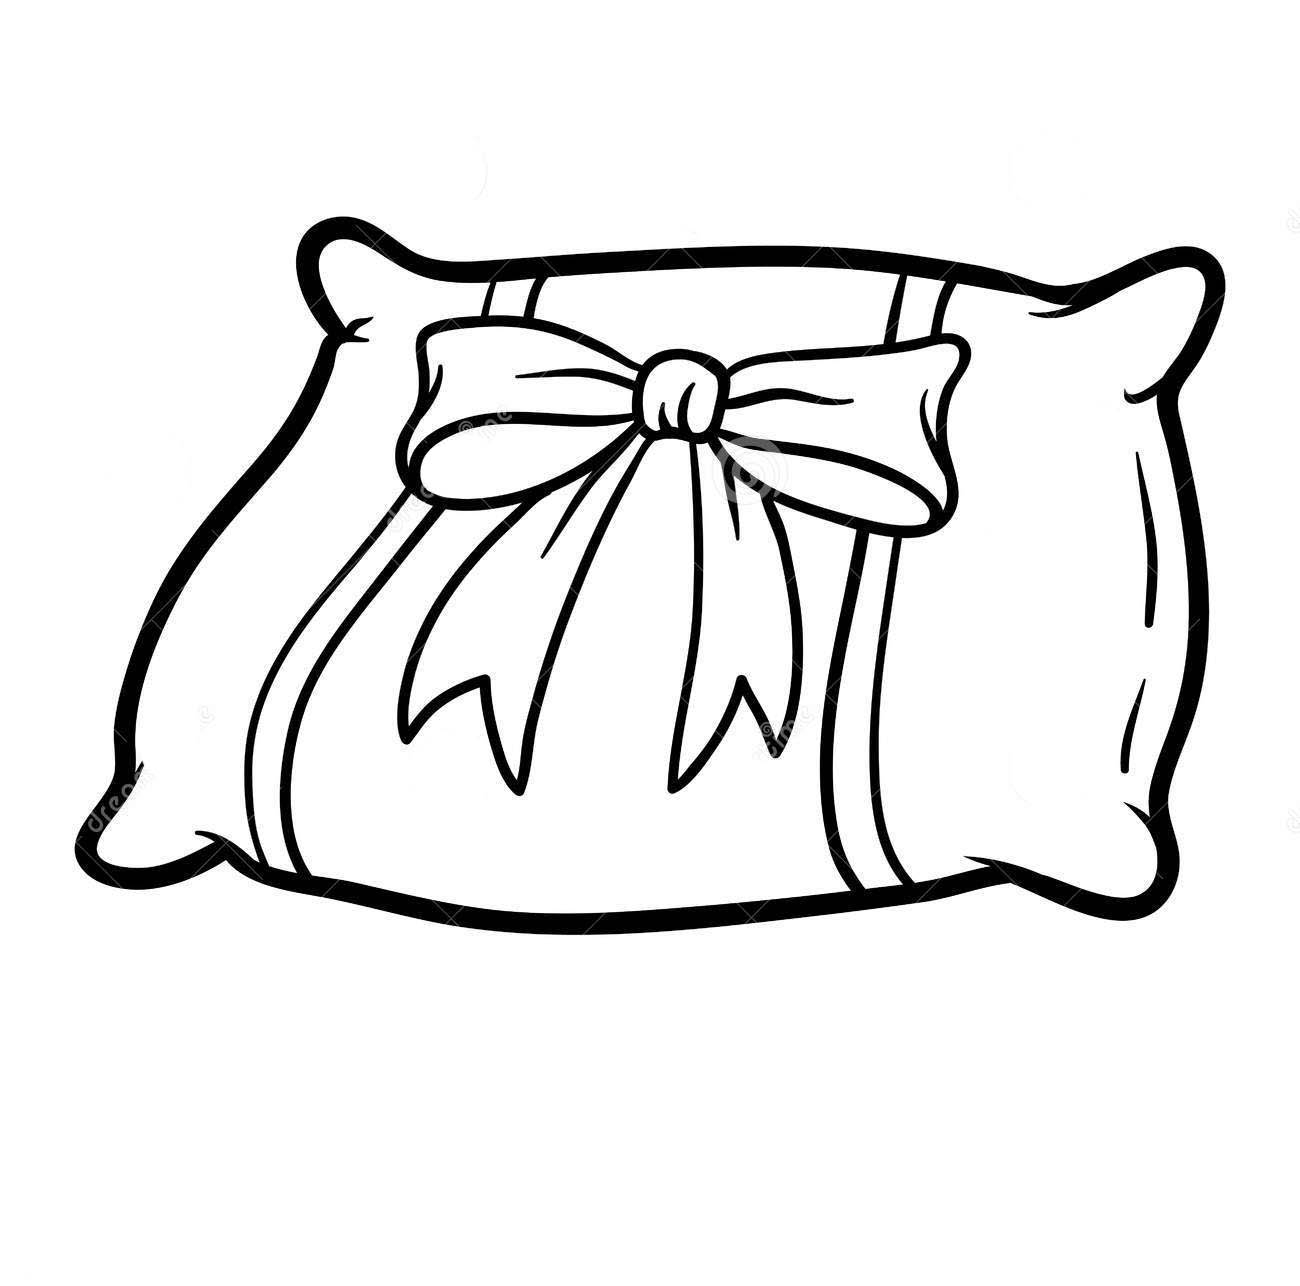 Pillow with bow